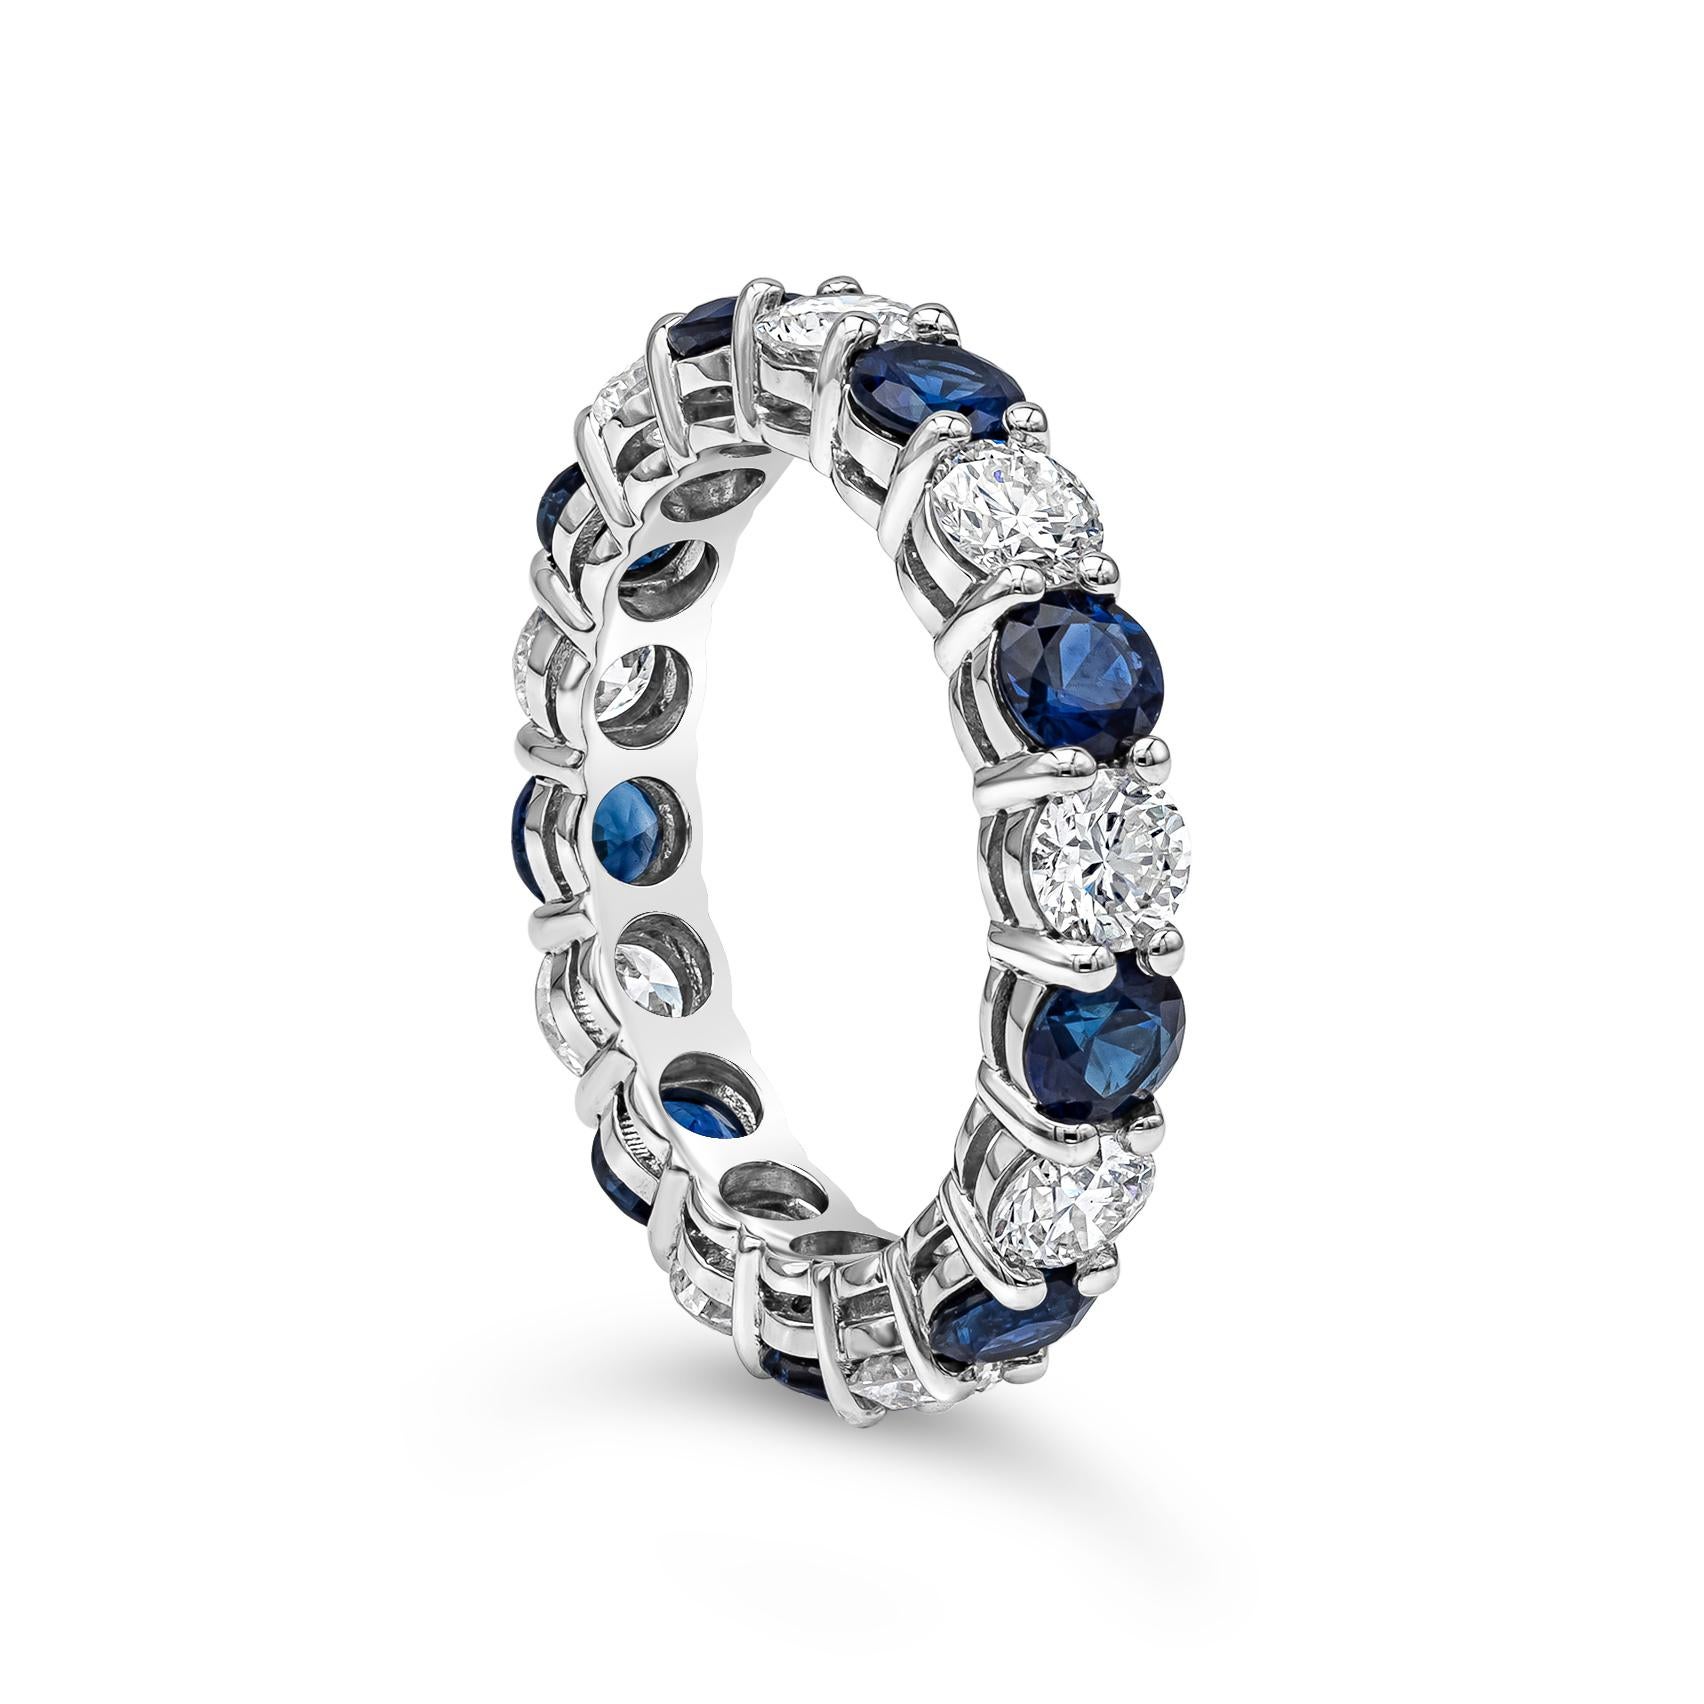 Features a classic eternity wedding band ring showcasing blue sapphires weighing 2.30 carats, elegantly alternates with round brilliant diamonds weighing 1.89 carats. Mounted in a shared-prong setting, Made with 18K White Gold. Size 6 US

Style